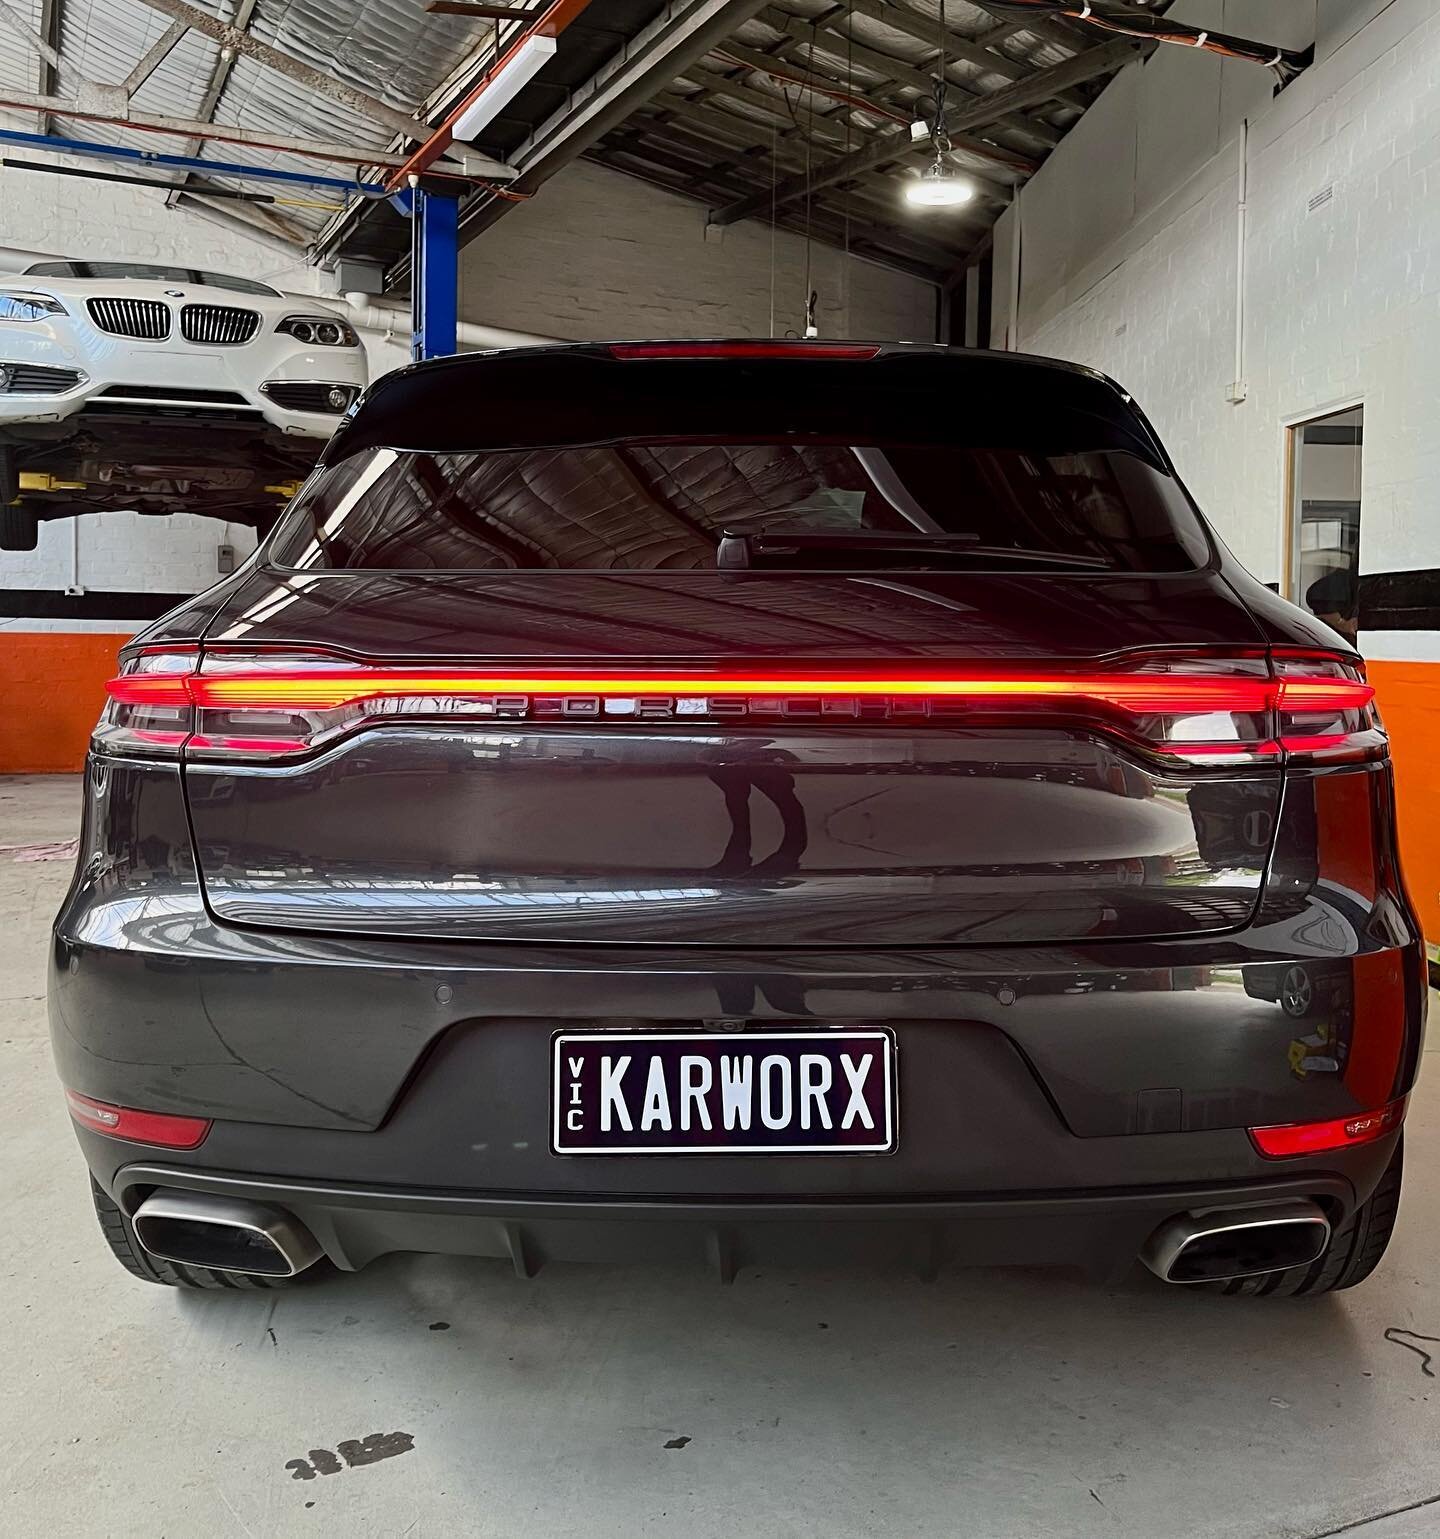 Porsche Macan in for a Service🛠 Book in your vehicle for a service with our qualified technicians at Karworx! 🧑&zwj;🔧Call us today to book in or click the link in our bio to contact us!
📞Essendon 9370 2323
📞Collingwood 9419 8721
📞Ringwood East 